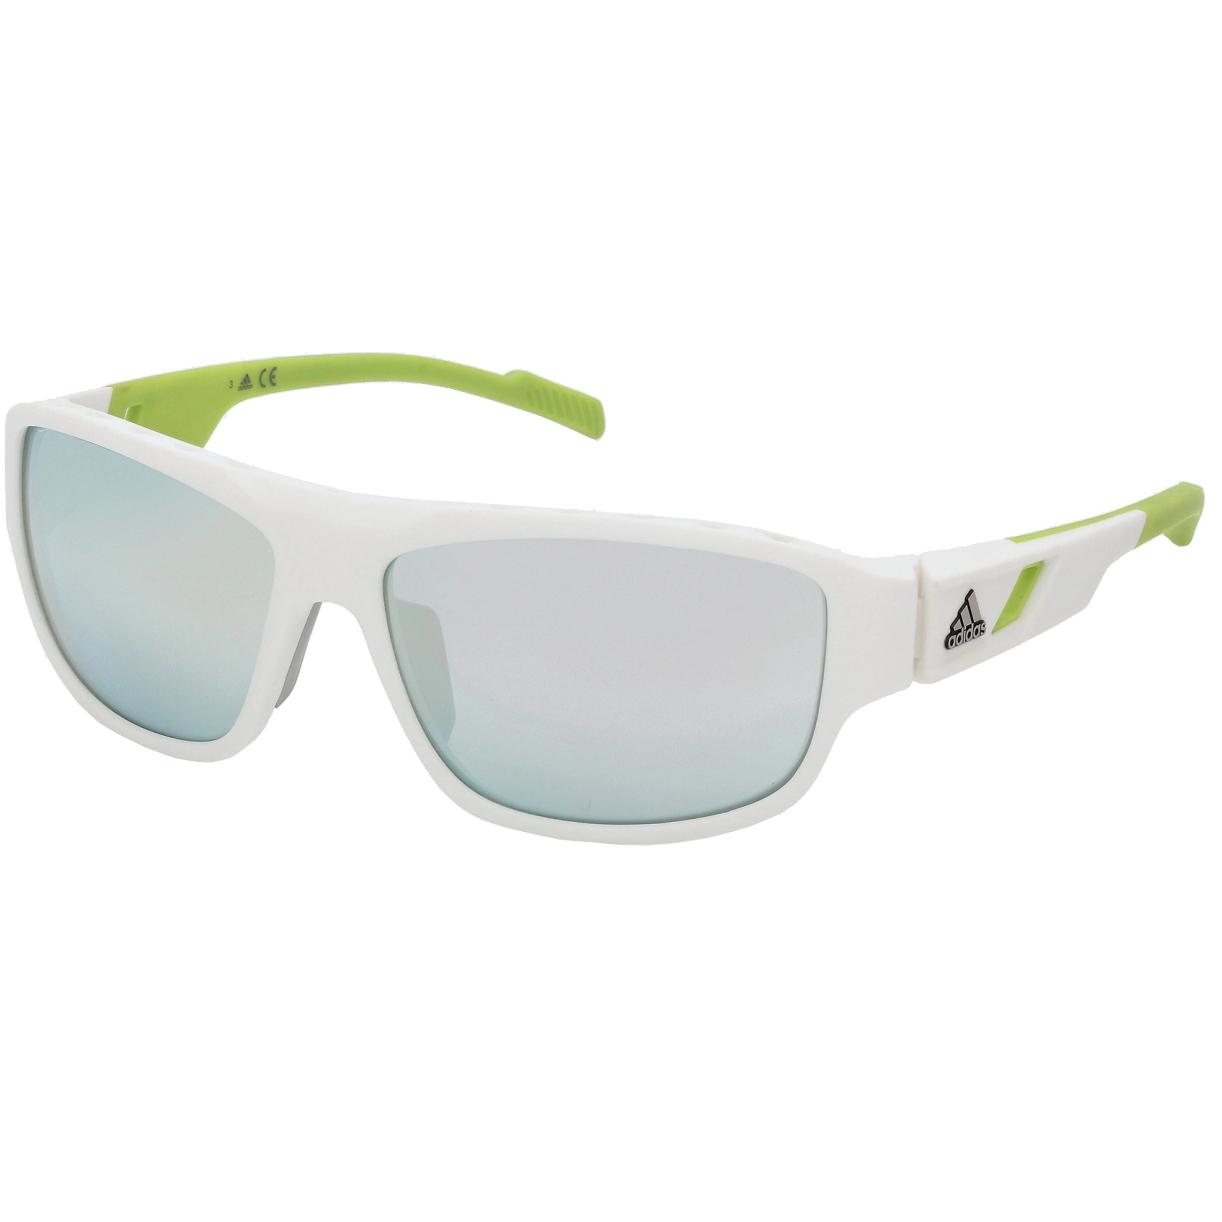 Picture of adidas Actv Classic SP0045 Sport Sunglasses - White/Other / Conrast Mirror Smoke